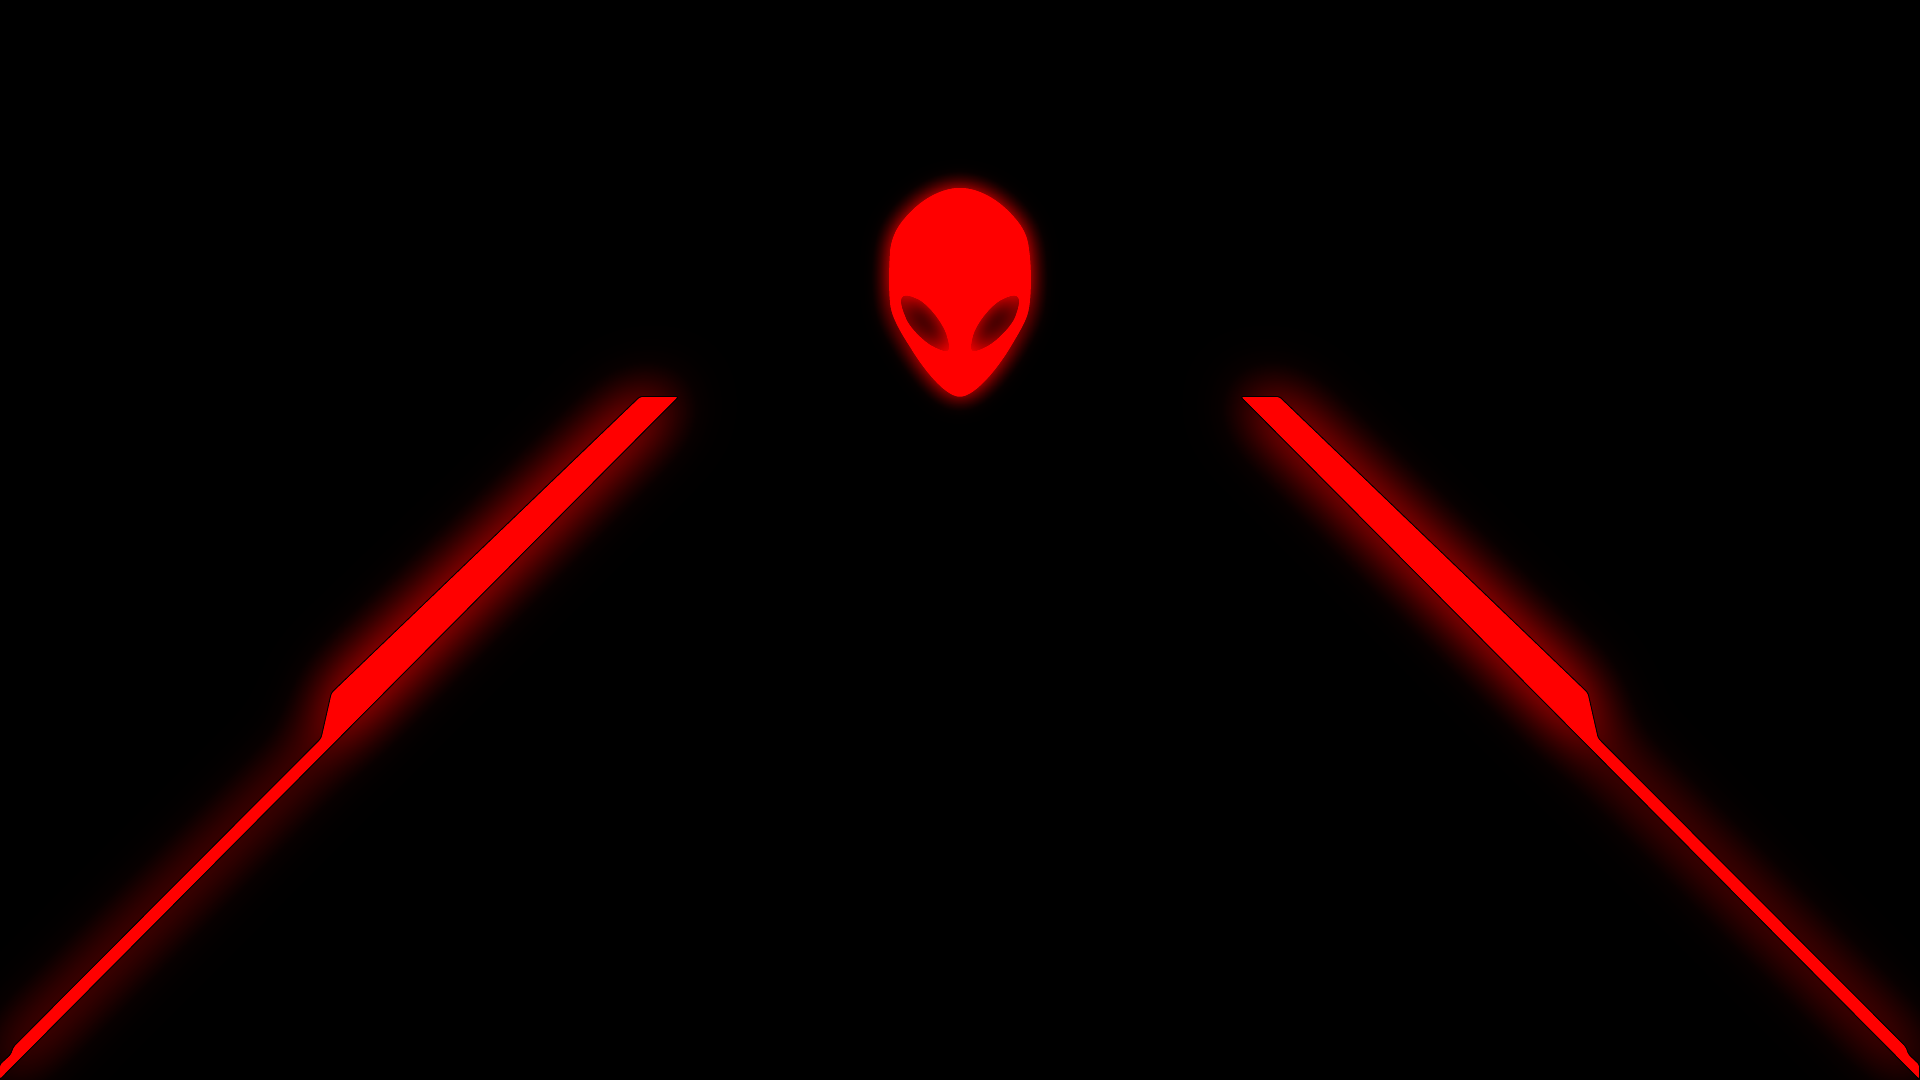 Black and Red Alienware Wallpaper 58802 1920x1080 px